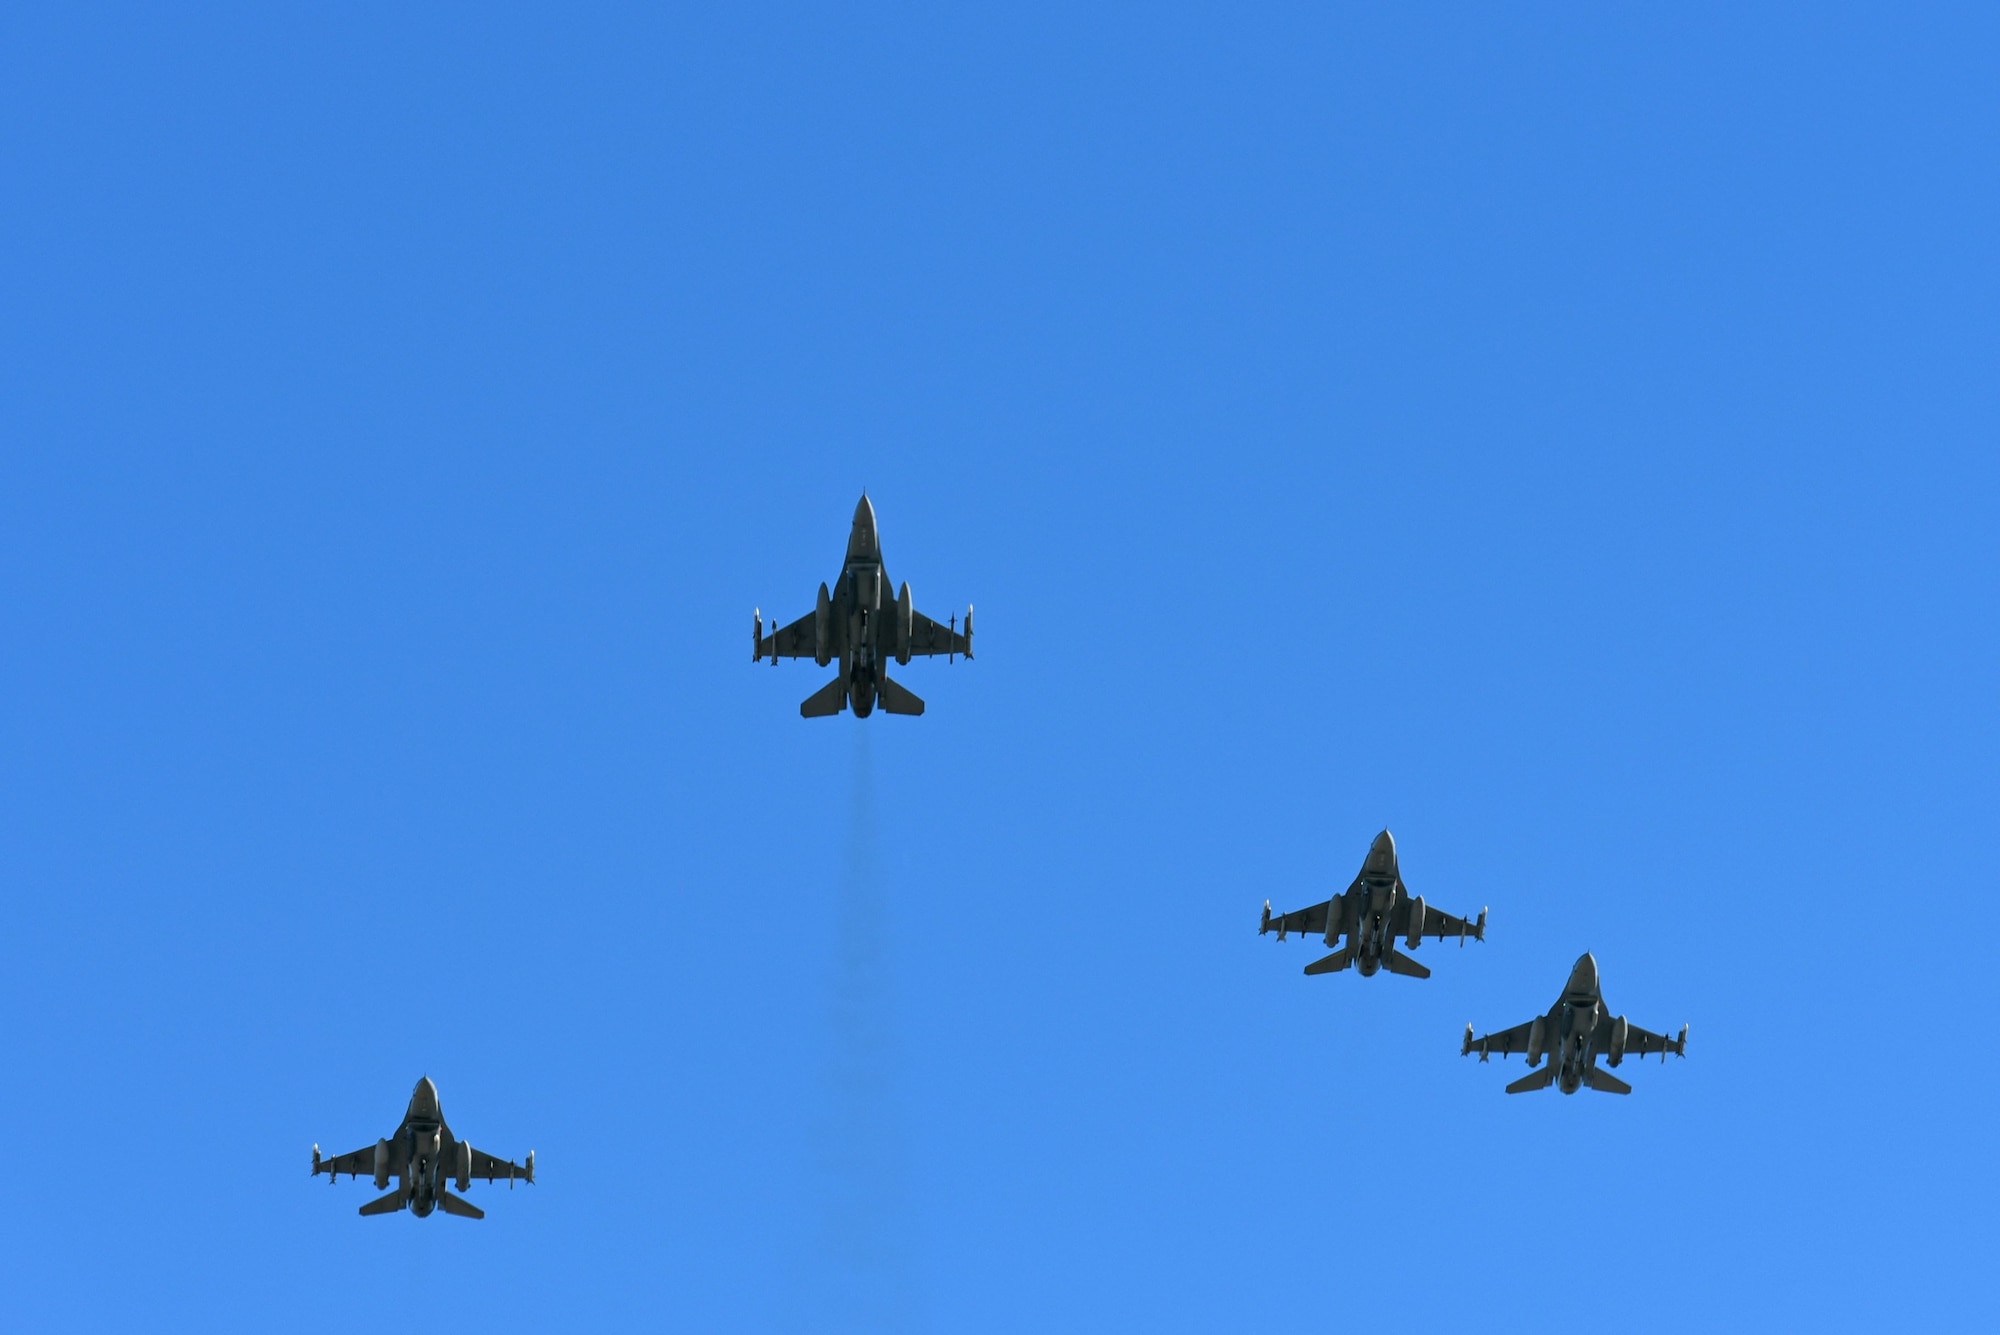 U.S. Air Force 20th Fighter Wing F-16CM Fighting Falcon pilots fly over a ceremony honoring late Col. Charles C. Heckel, a World War II prisoner of war, at Shaw Air Force Base, S.C., Jan. 19, 2018.